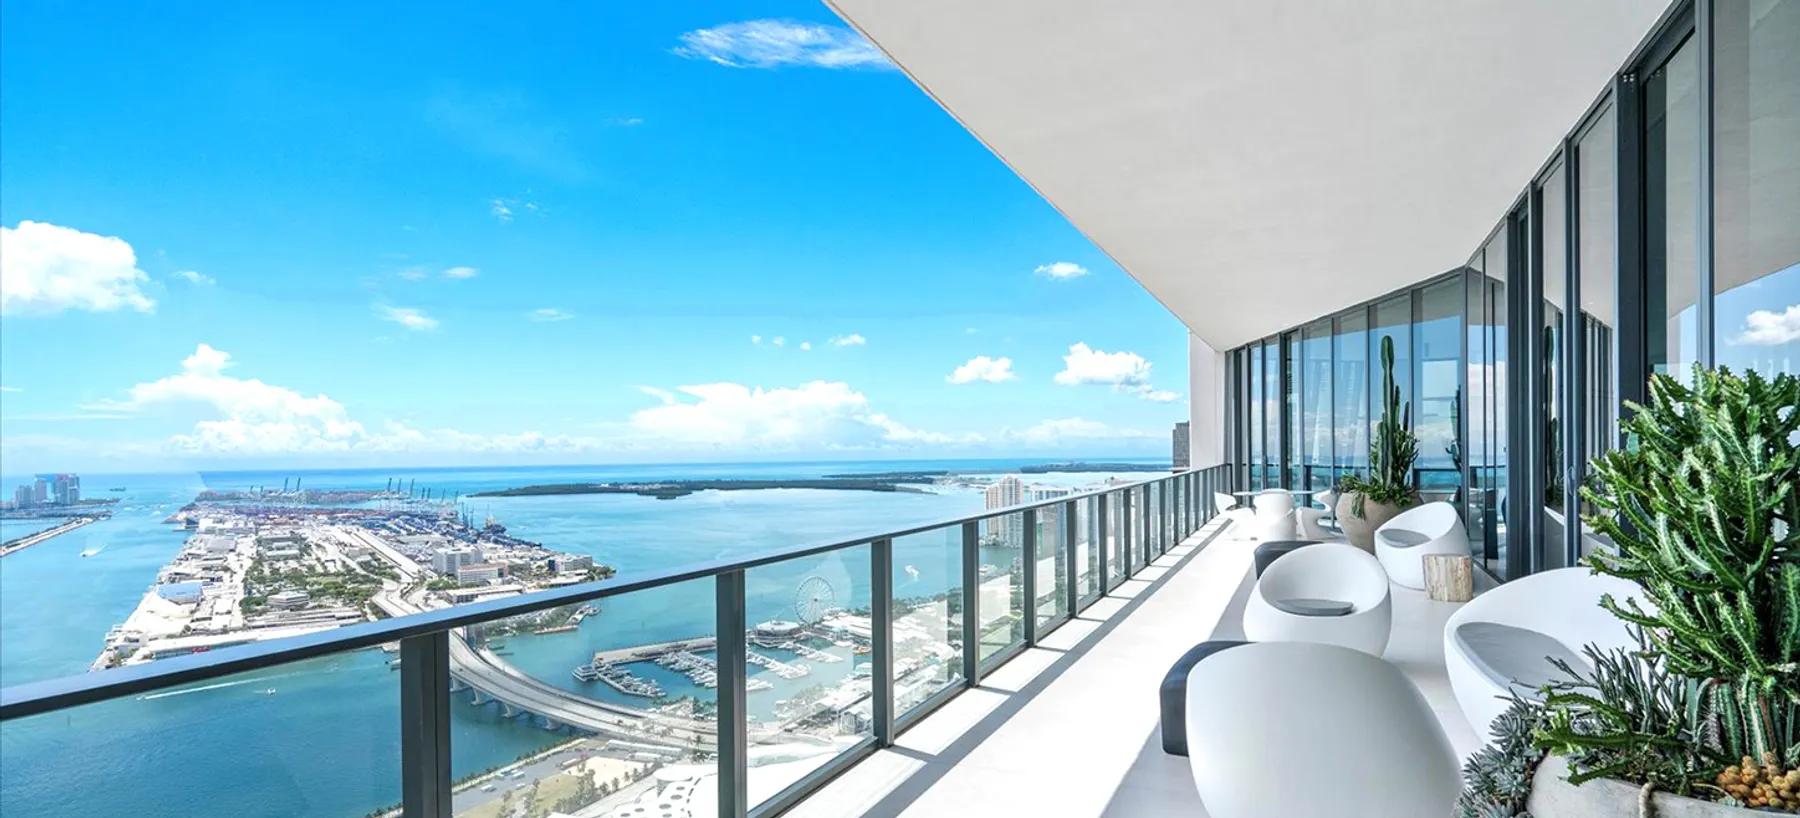 Find Luxury Real Estate in Miami Beach | The Corcoran Group